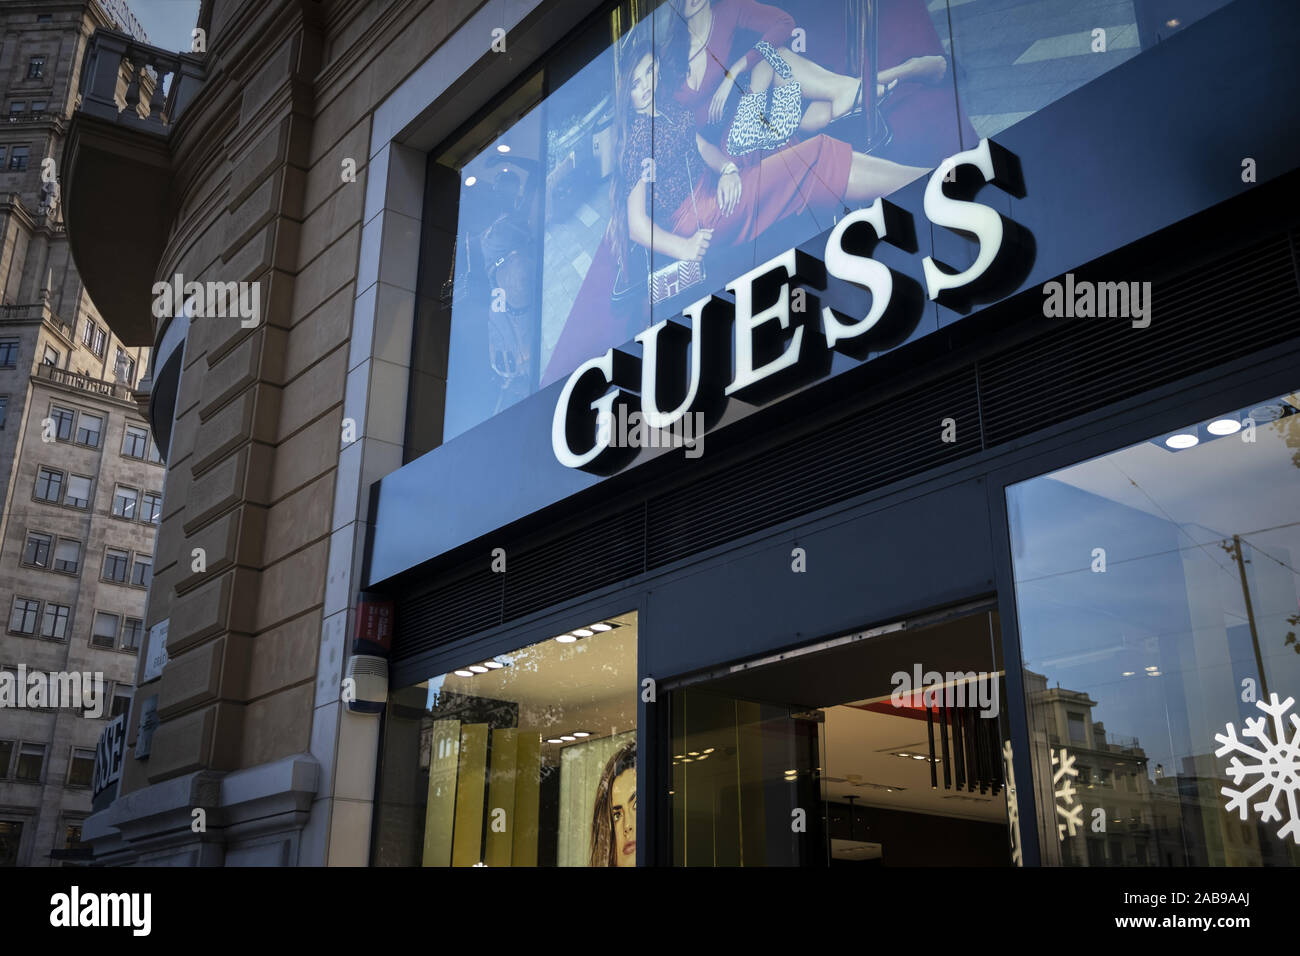 November 25, 2019, Barcelona, Spain: The GUESS logo, Italian brand of luxury clothing and accessories manufacturer, at the Passeig de GrÃ cia store..A boulevard of just over a kilometre, the